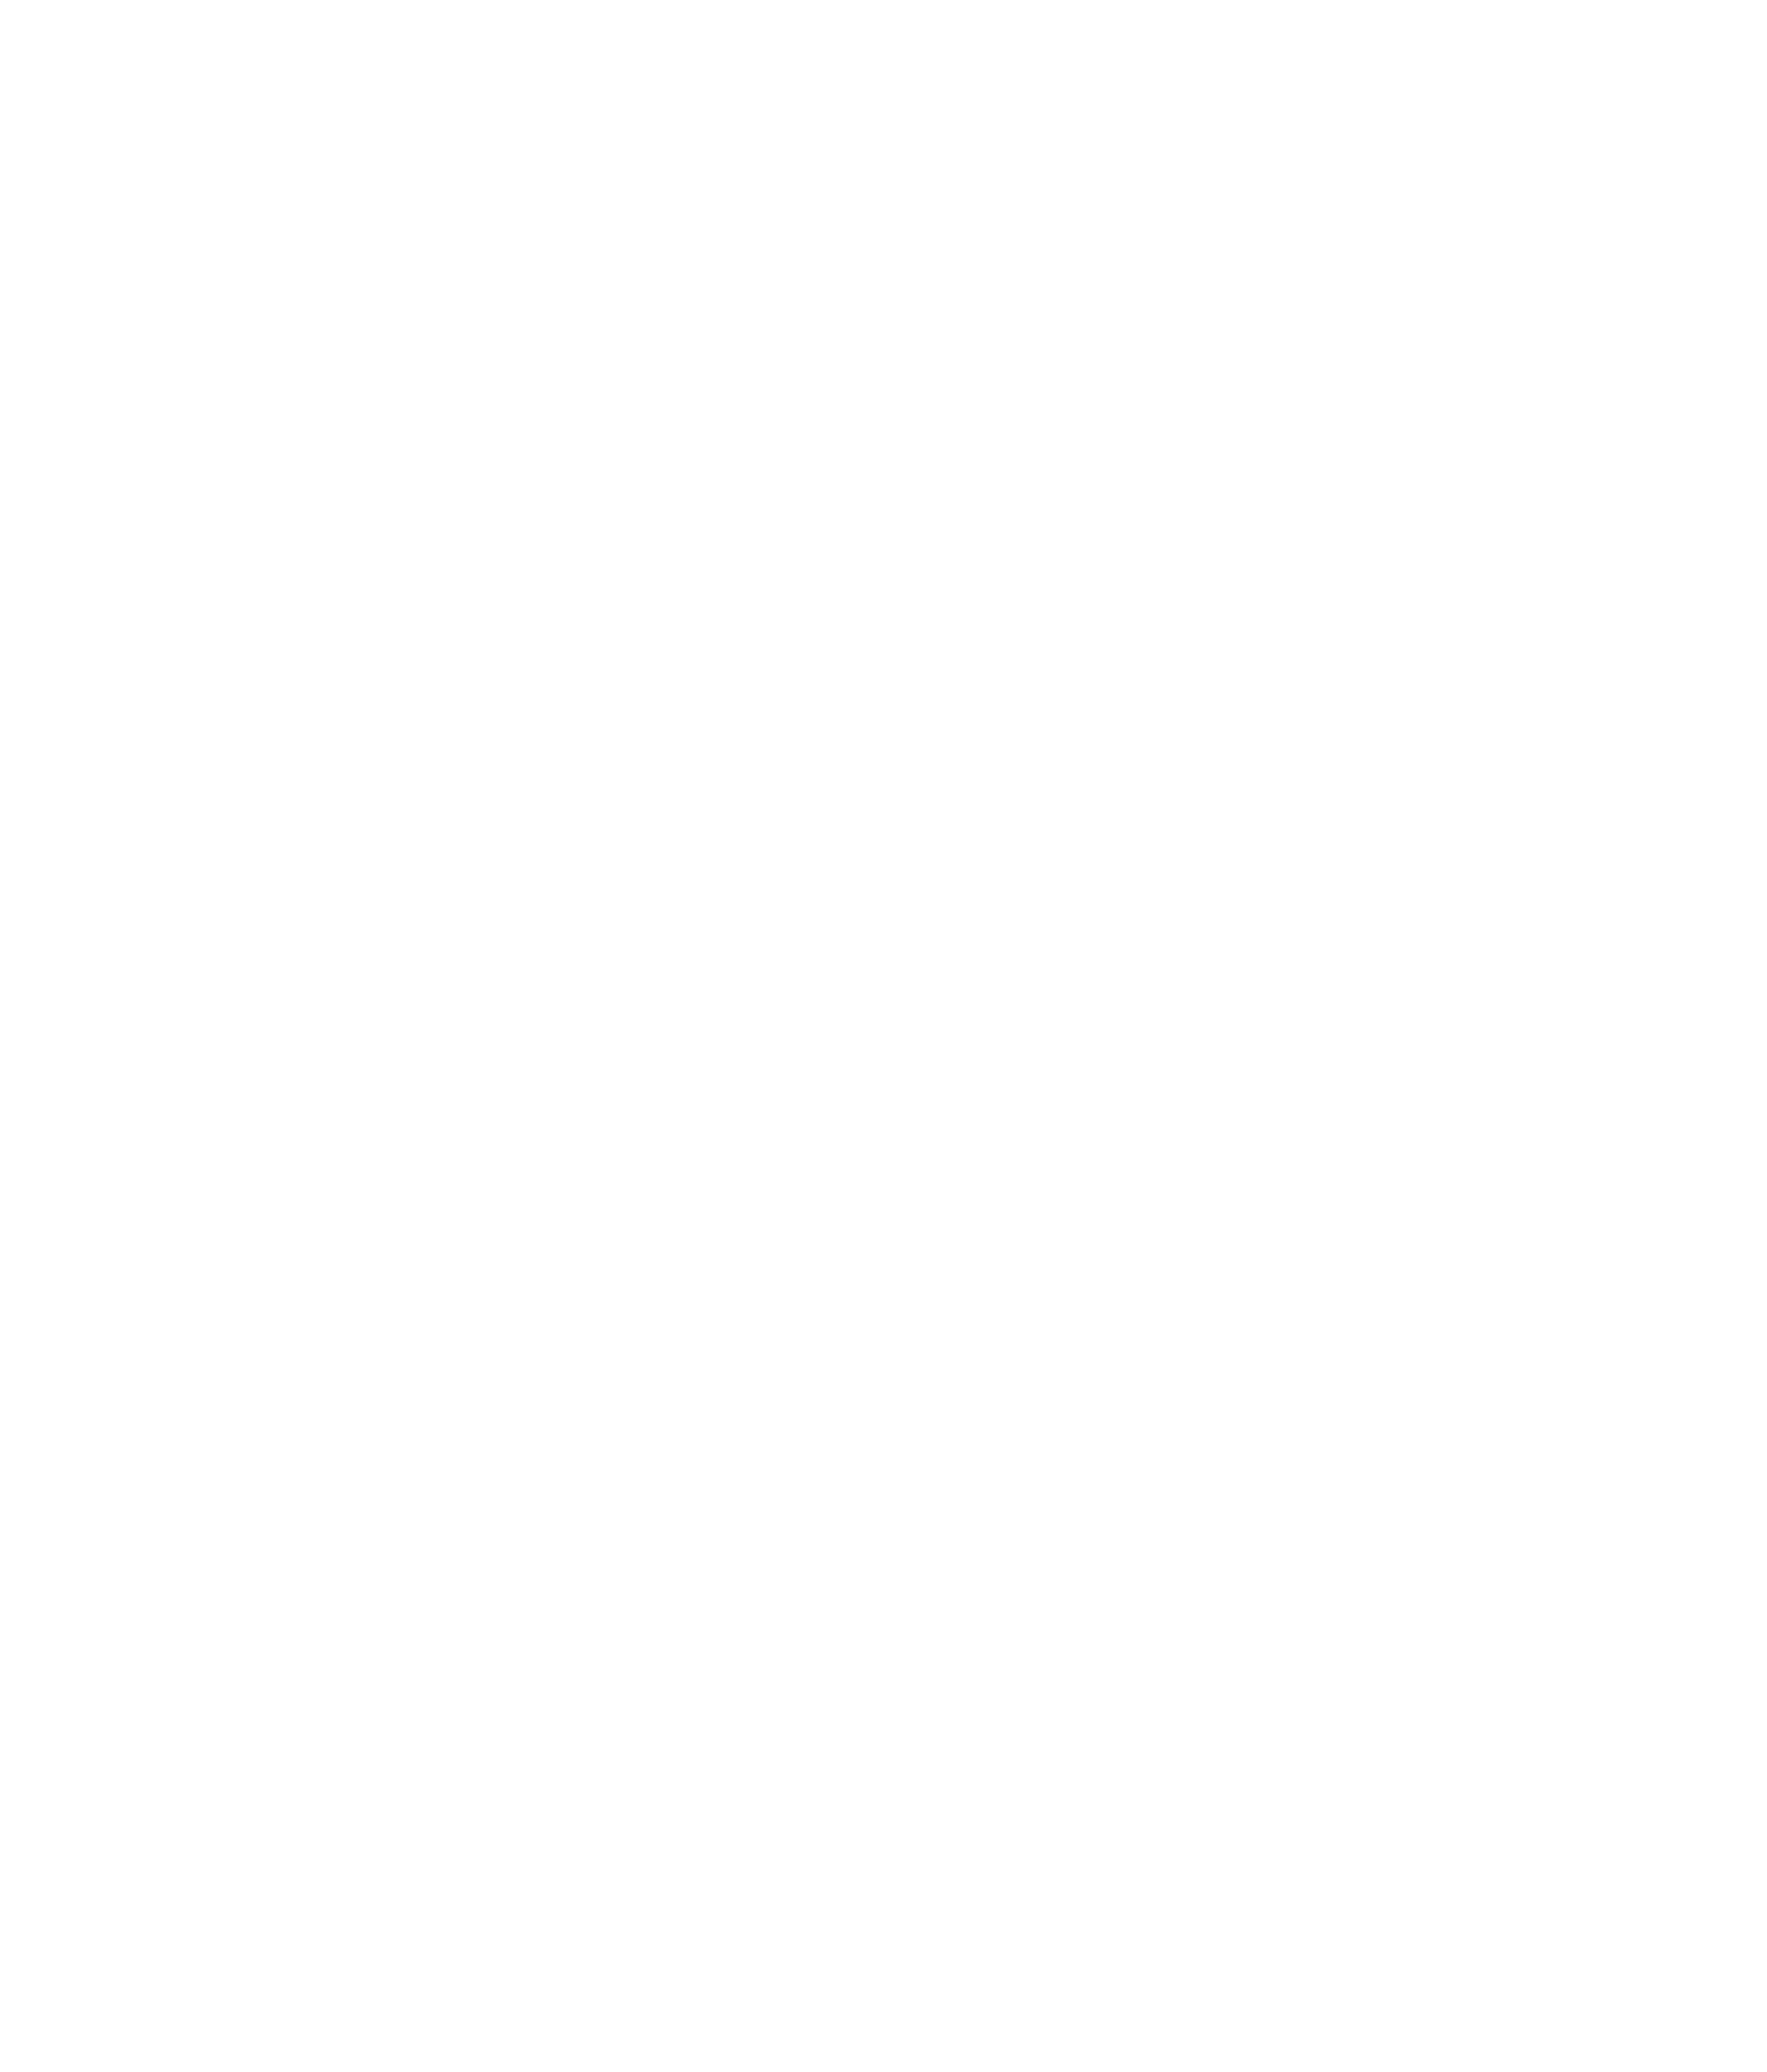 Thanks to Treescapes UK for supporting this event.